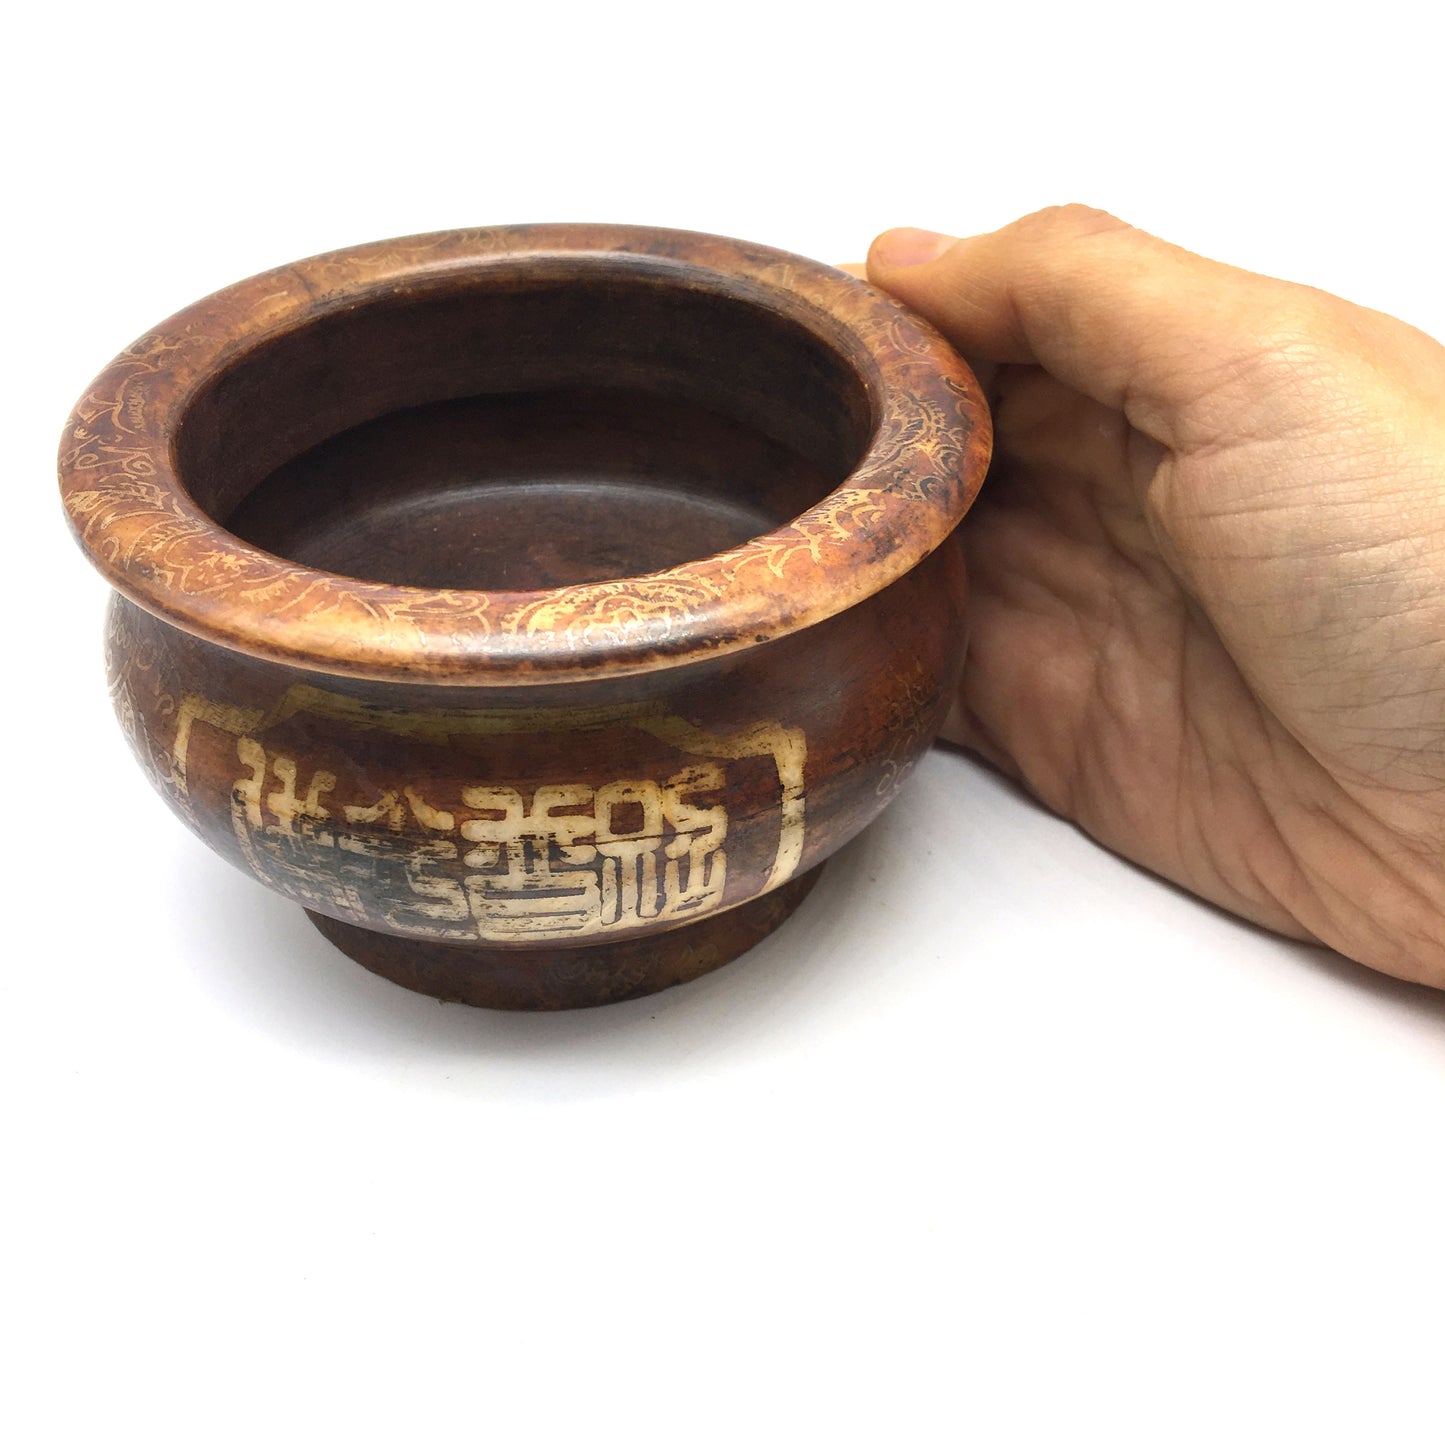 Soapstone Incense Smudging Jade Bowl Pot Natural Henna Colors -Ethnic Style